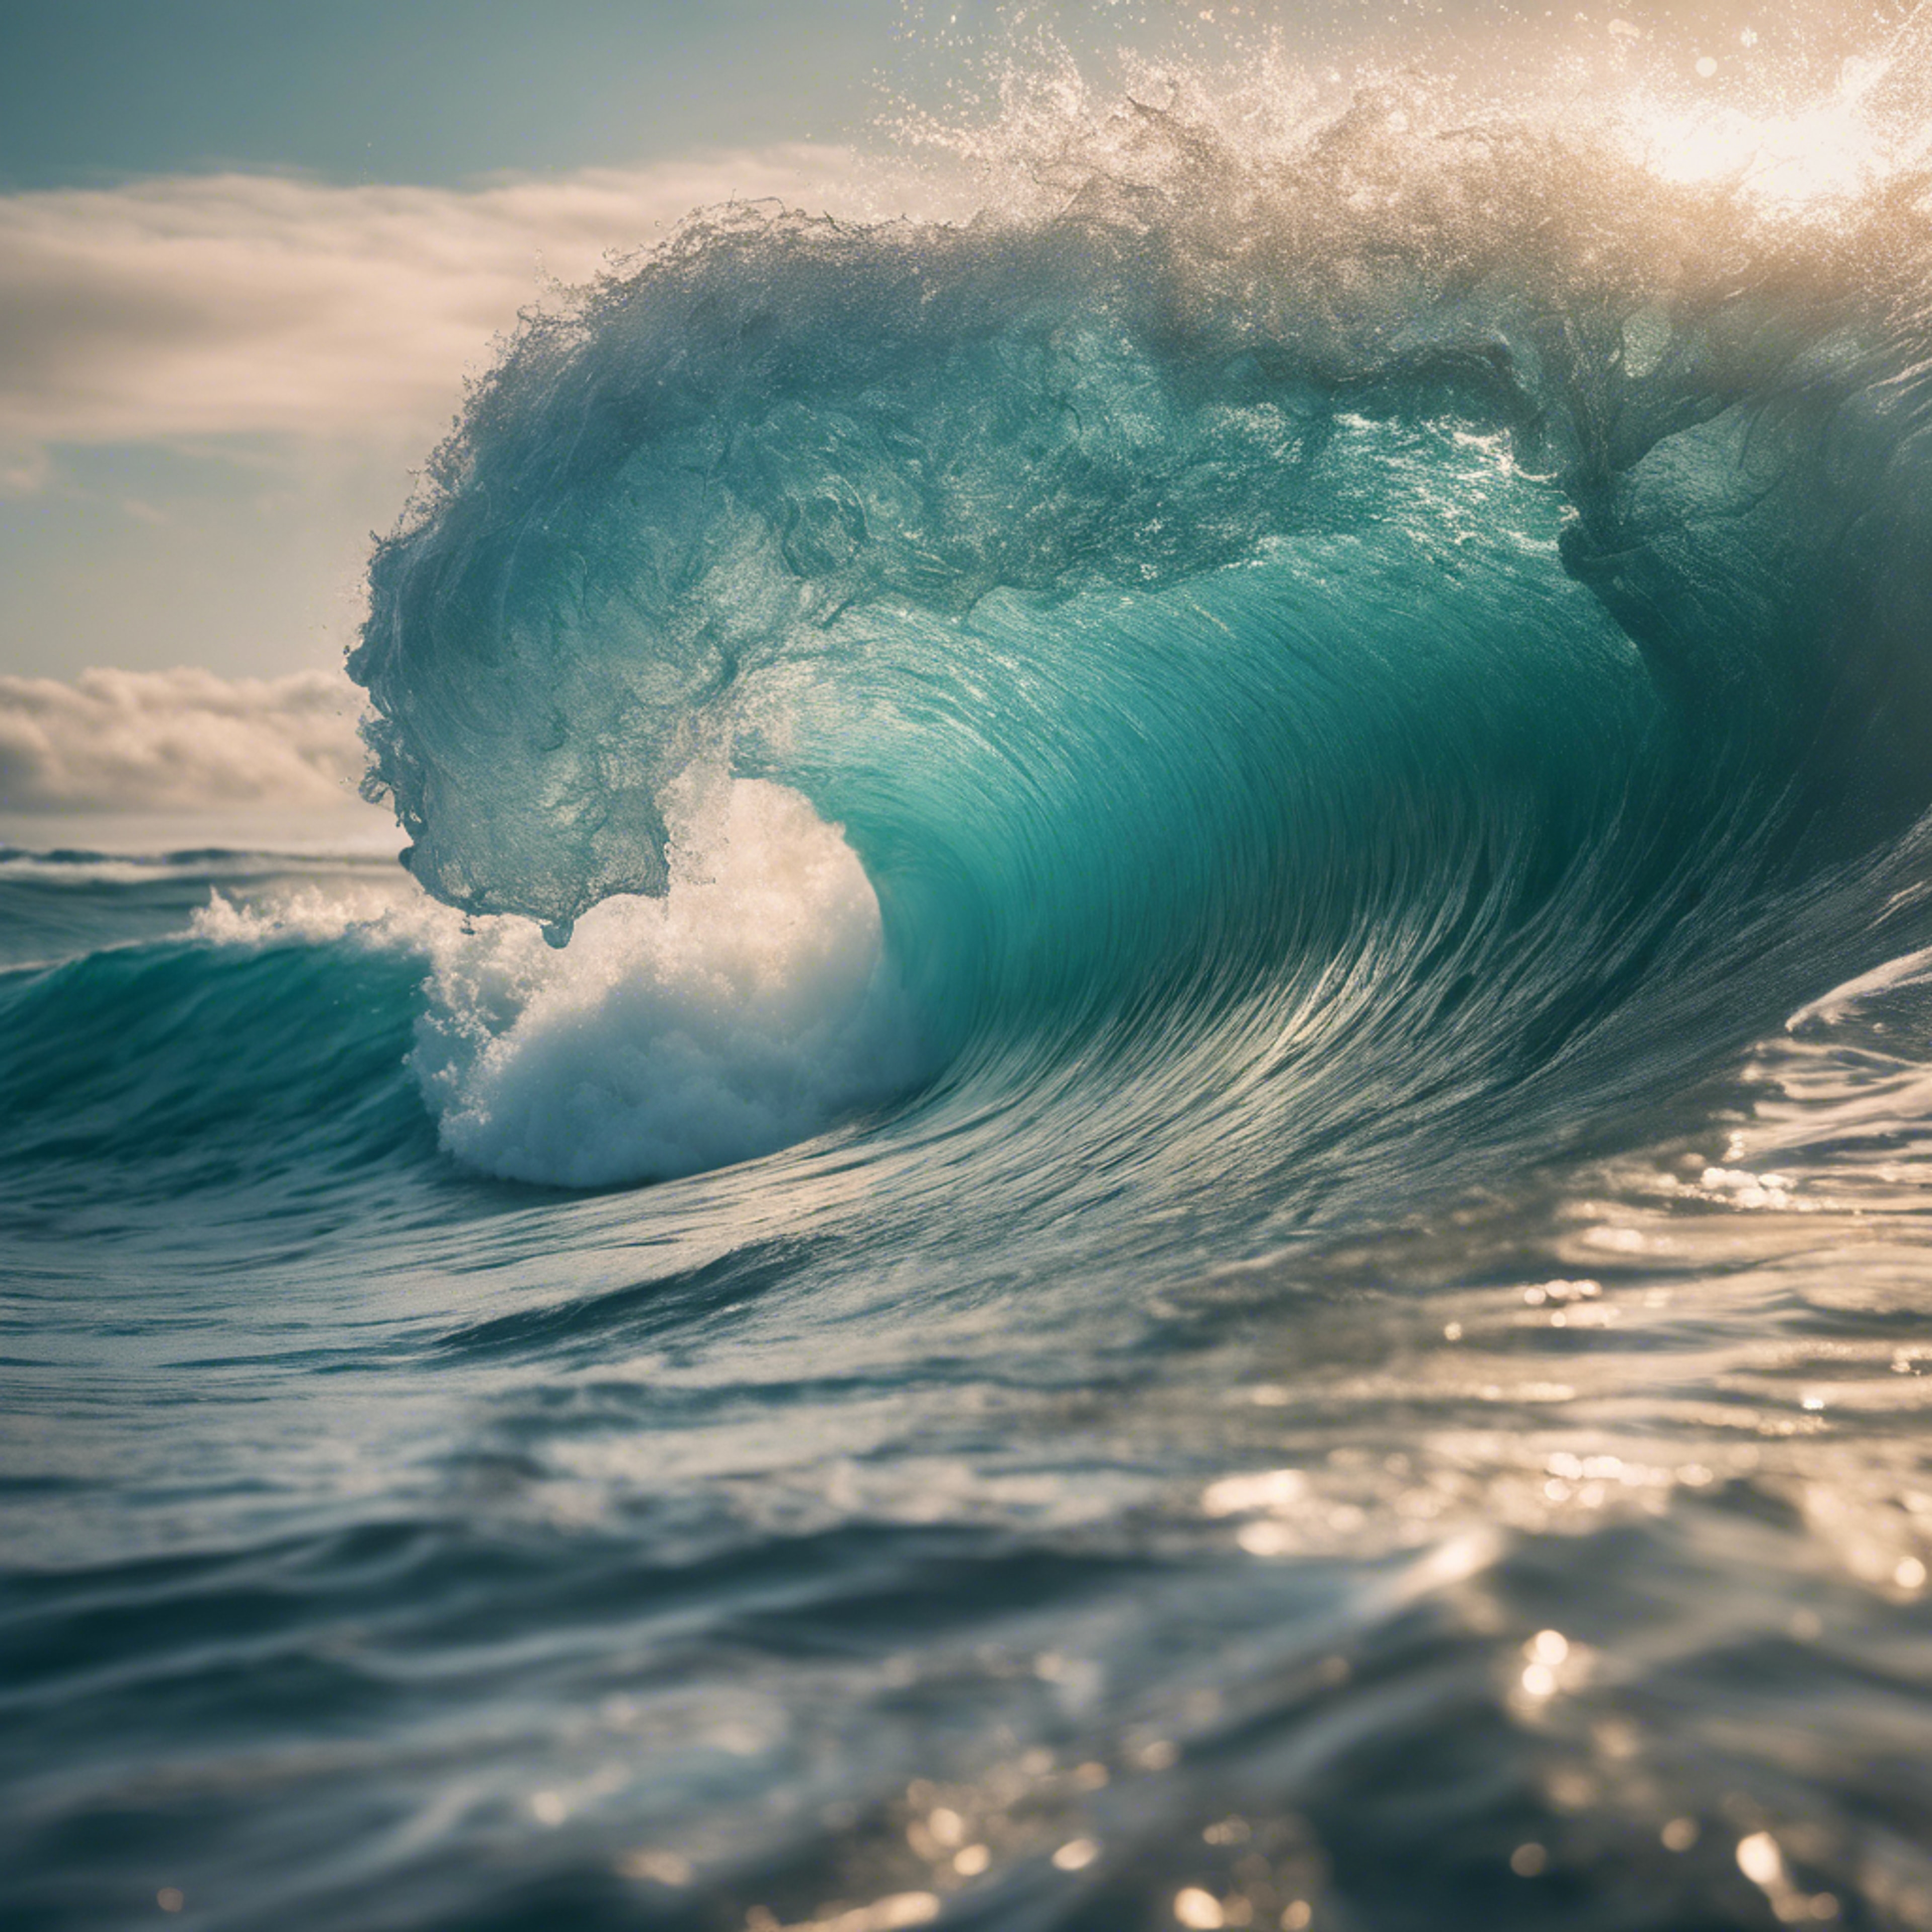 A powerful ocean wave about to crash, casting a cool teal hue. วอลล์เปเปอร์[600fa377246440af9acb]